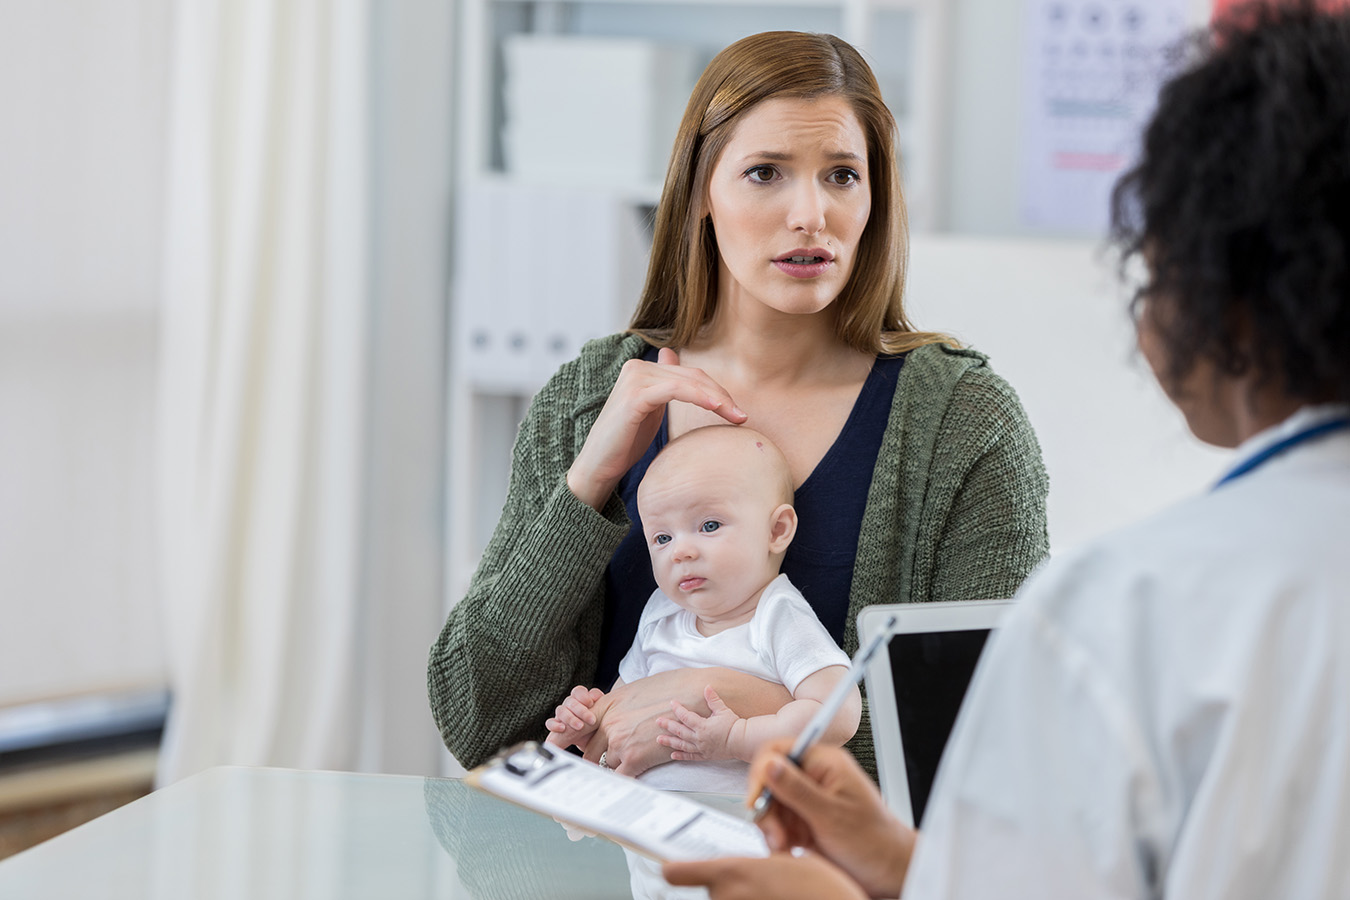 Woman with baby on lap asks doctor about AVMs